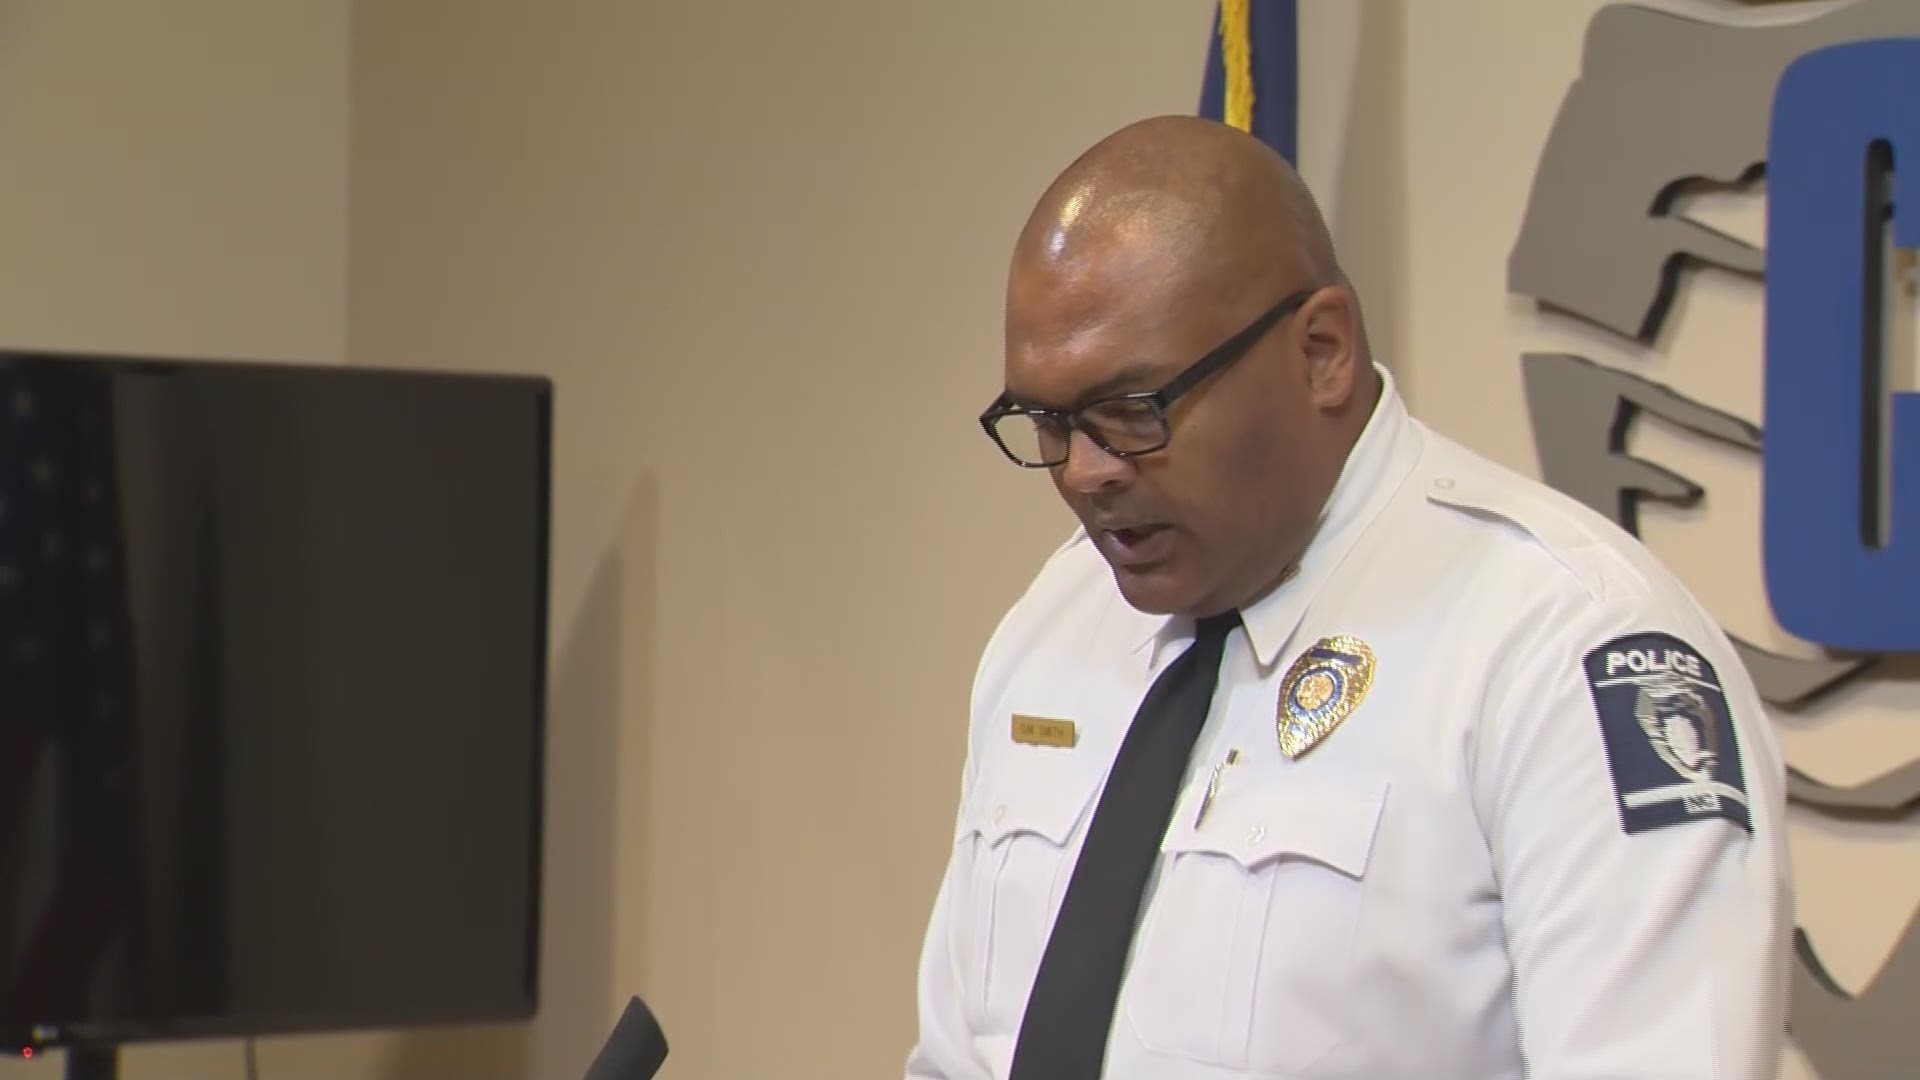 Henry Black, Chair of the Citizens Review Board in Charlotte overseeing police accountability, has been arrested for allegedly sexual assault of two people, Charlotte-Mecklenburg Police Department said.